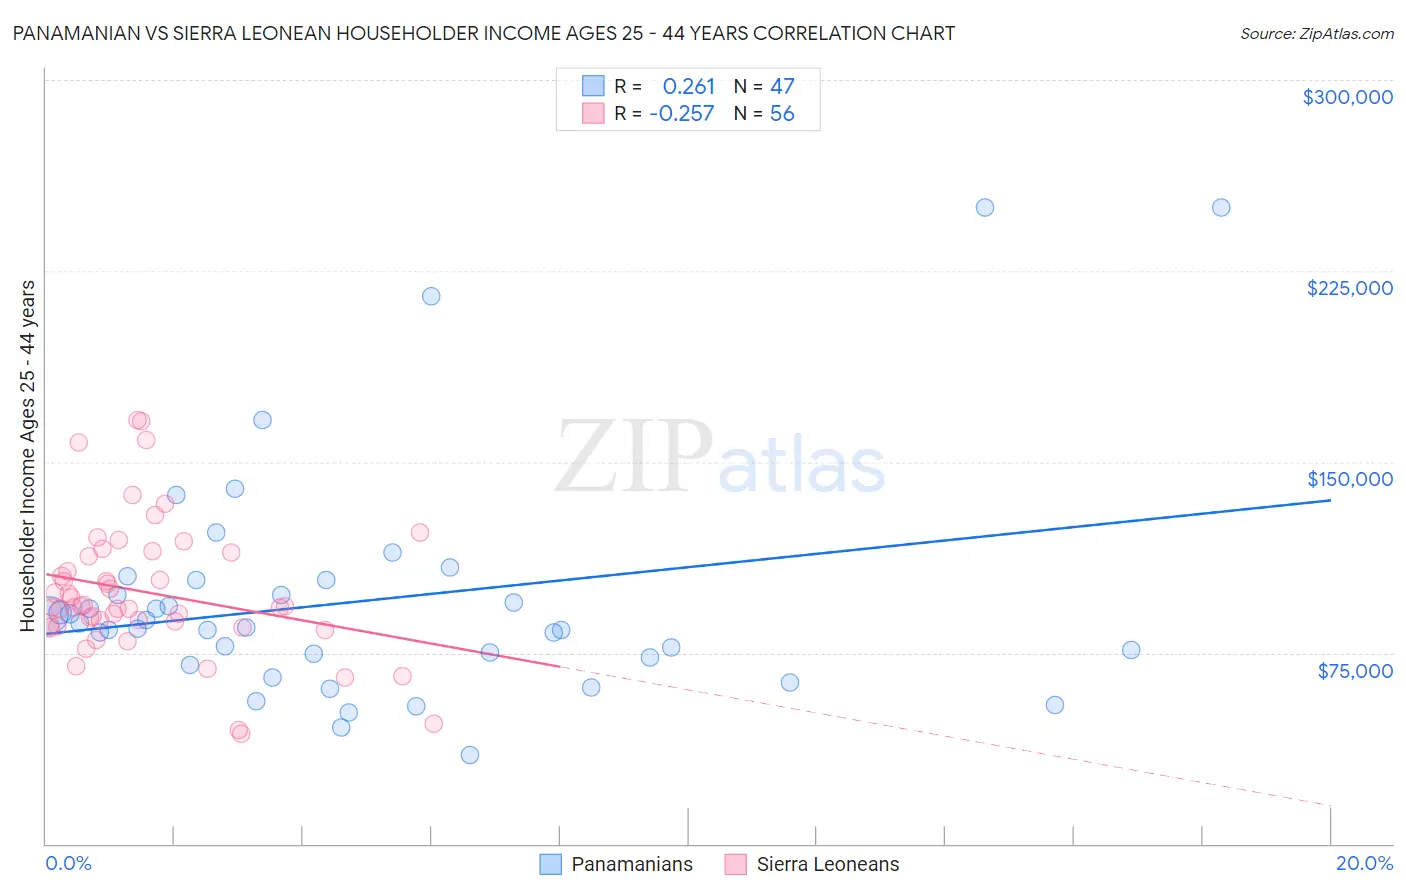 Panamanian vs Sierra Leonean Householder Income Ages 25 - 44 years